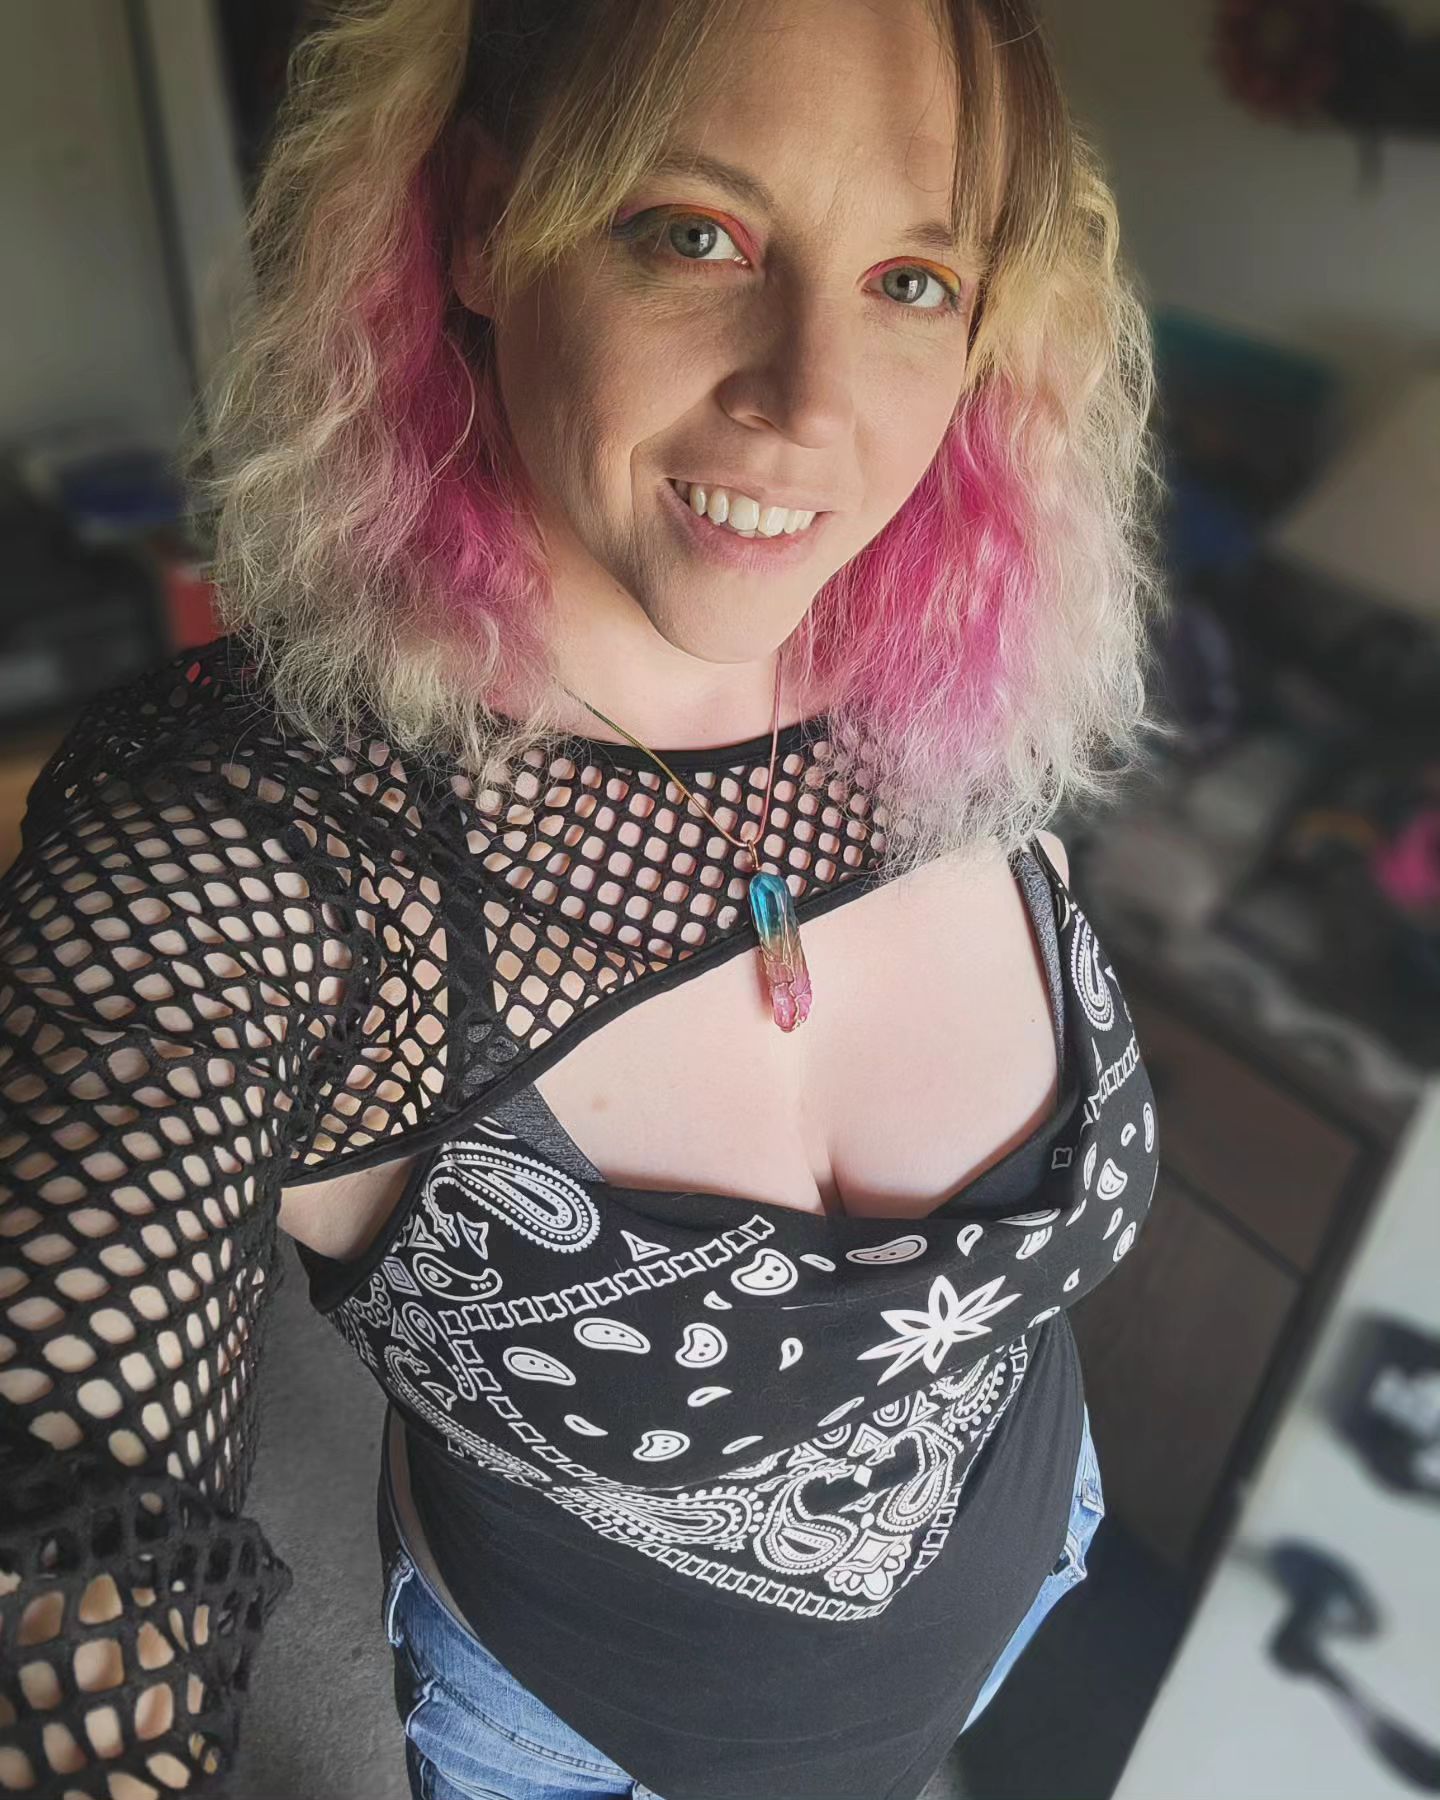 Heading out for some late lunch, then home for some tv and a twitch stream. Happy #tuesday Sue Crew!
💕❤️🧡💛💚💙💜💕

🦄
🌈
🦄
🌈
🦄
🌈
🦄

links in bio ❤️

#twitch #twitchaffiliate #supportsmallstreamers #smallstreamer #streamergirl #gaming #gamer #girlgamer #gamergirl #gamerlife #pcgaming #happy #positivevibes #instamood #cute #twitchgirls #thickwomen #rainbow #unicorn #bekind #bekindtoyourself